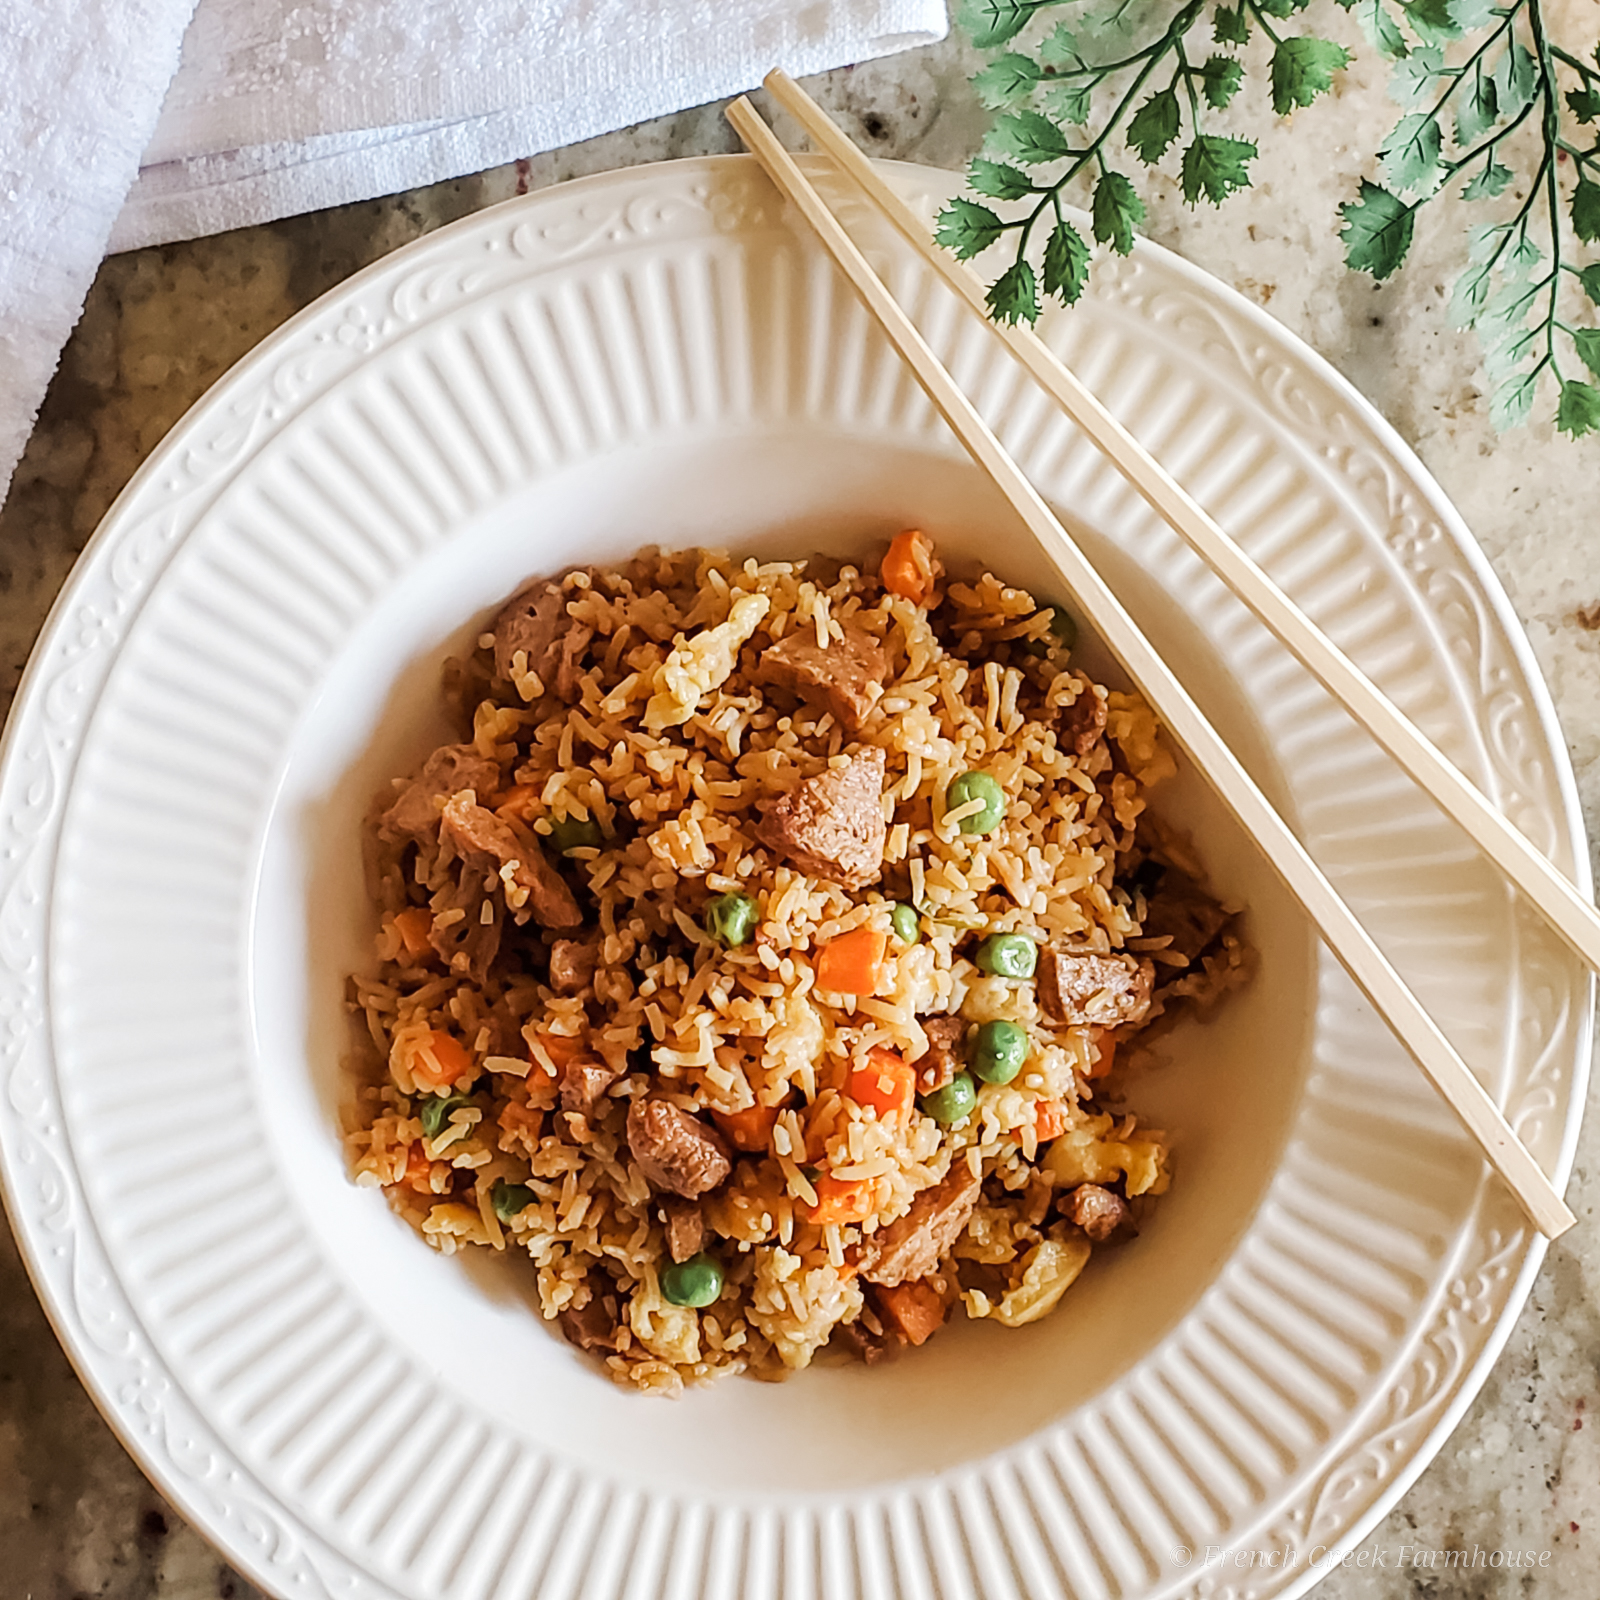 Make restaurant-quality fried rice in less time than it takes for delivery!